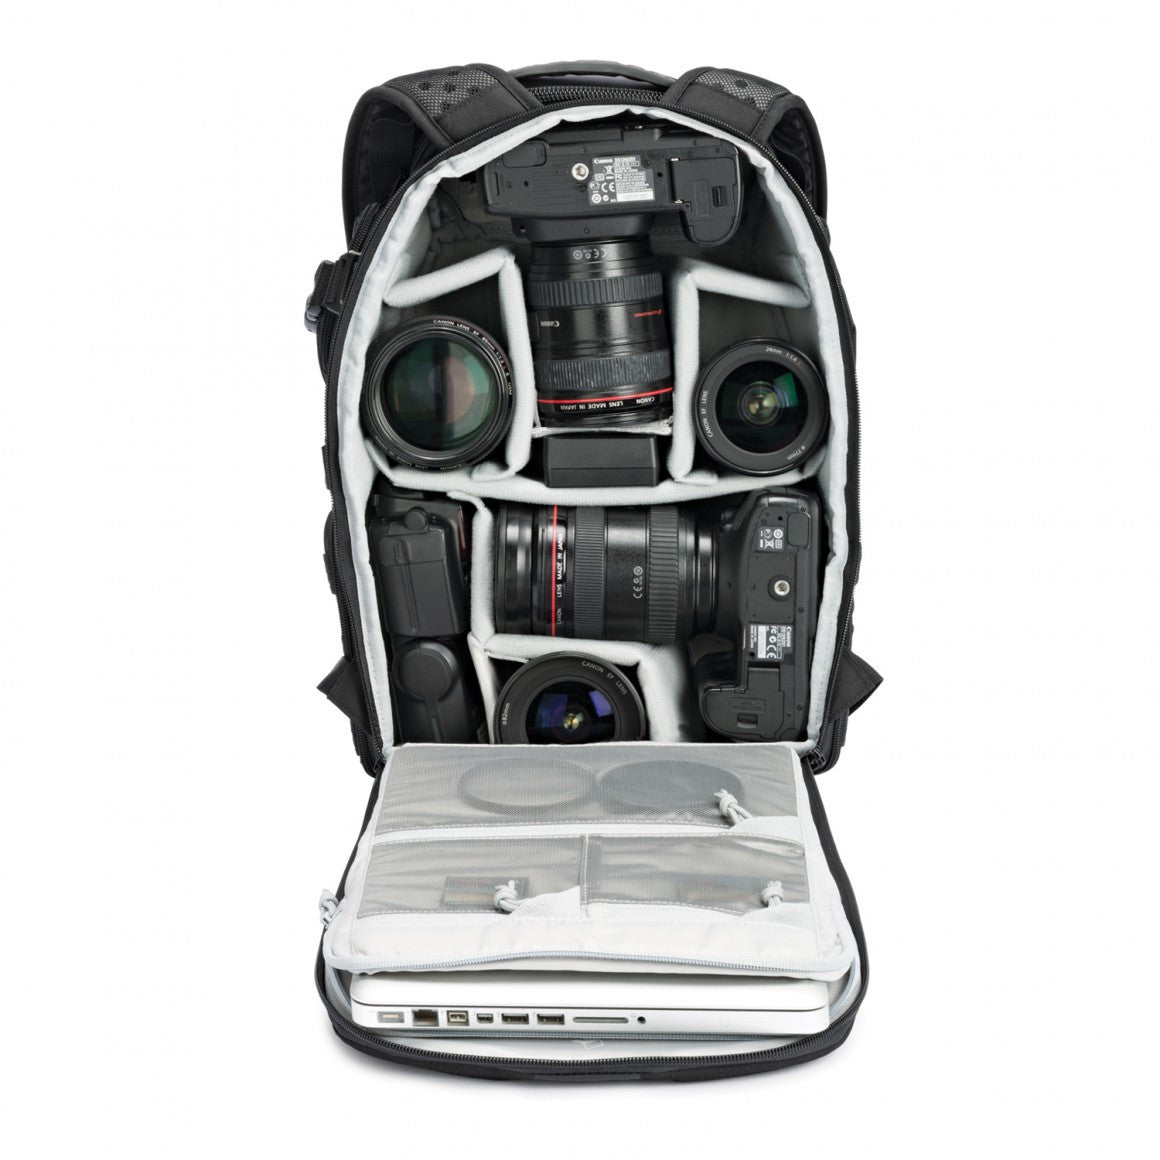 Lowepro Pro Tactic 350 AW Camera Bag, bags backpacks, Lowepro - Pictureline  - 3